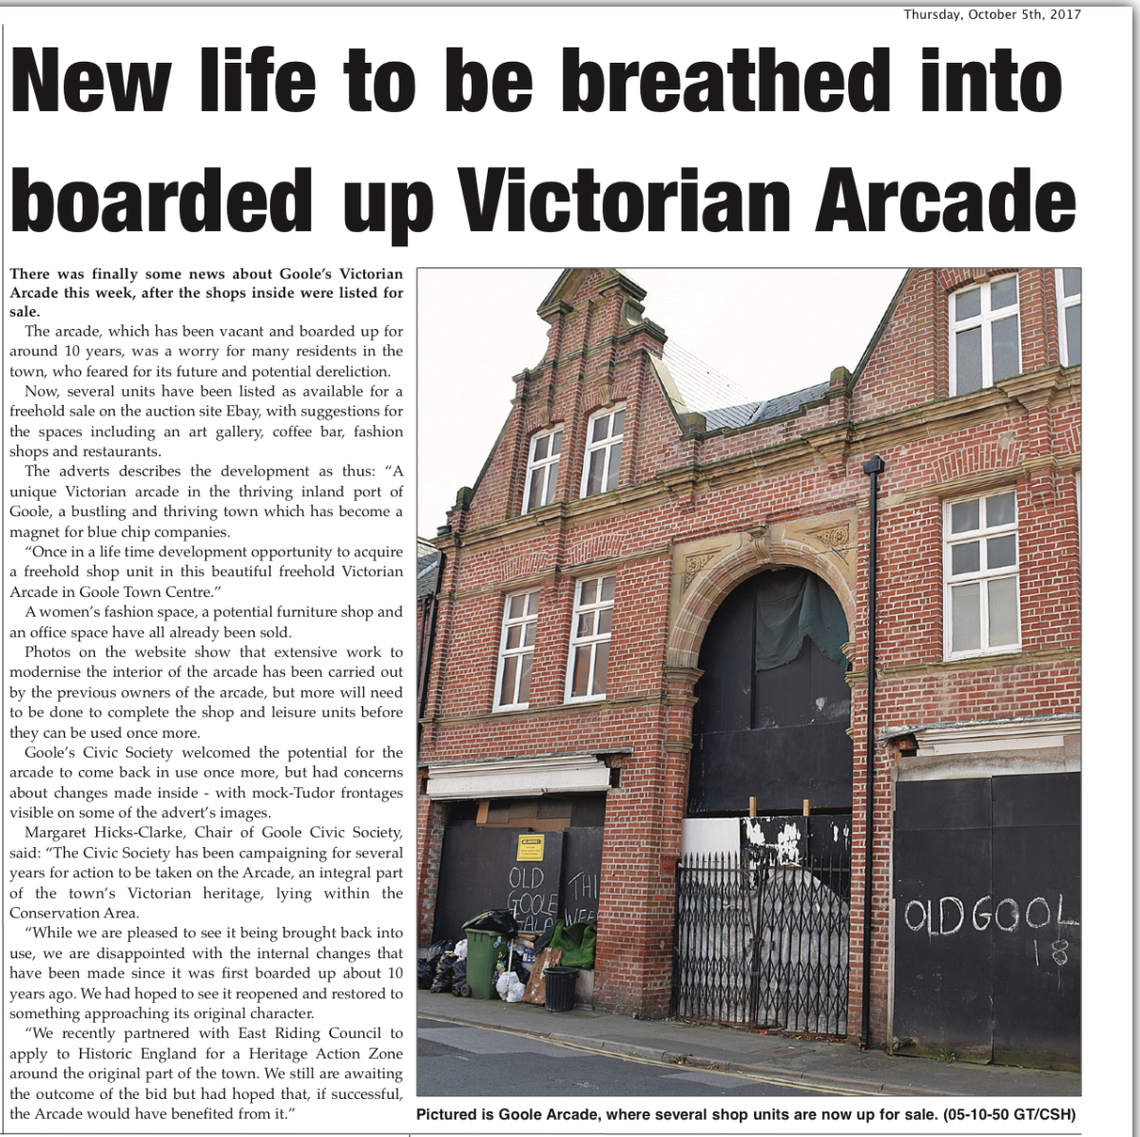 Regeneration of Victorian Arcade linked to East Riding of Yorkshire heritage